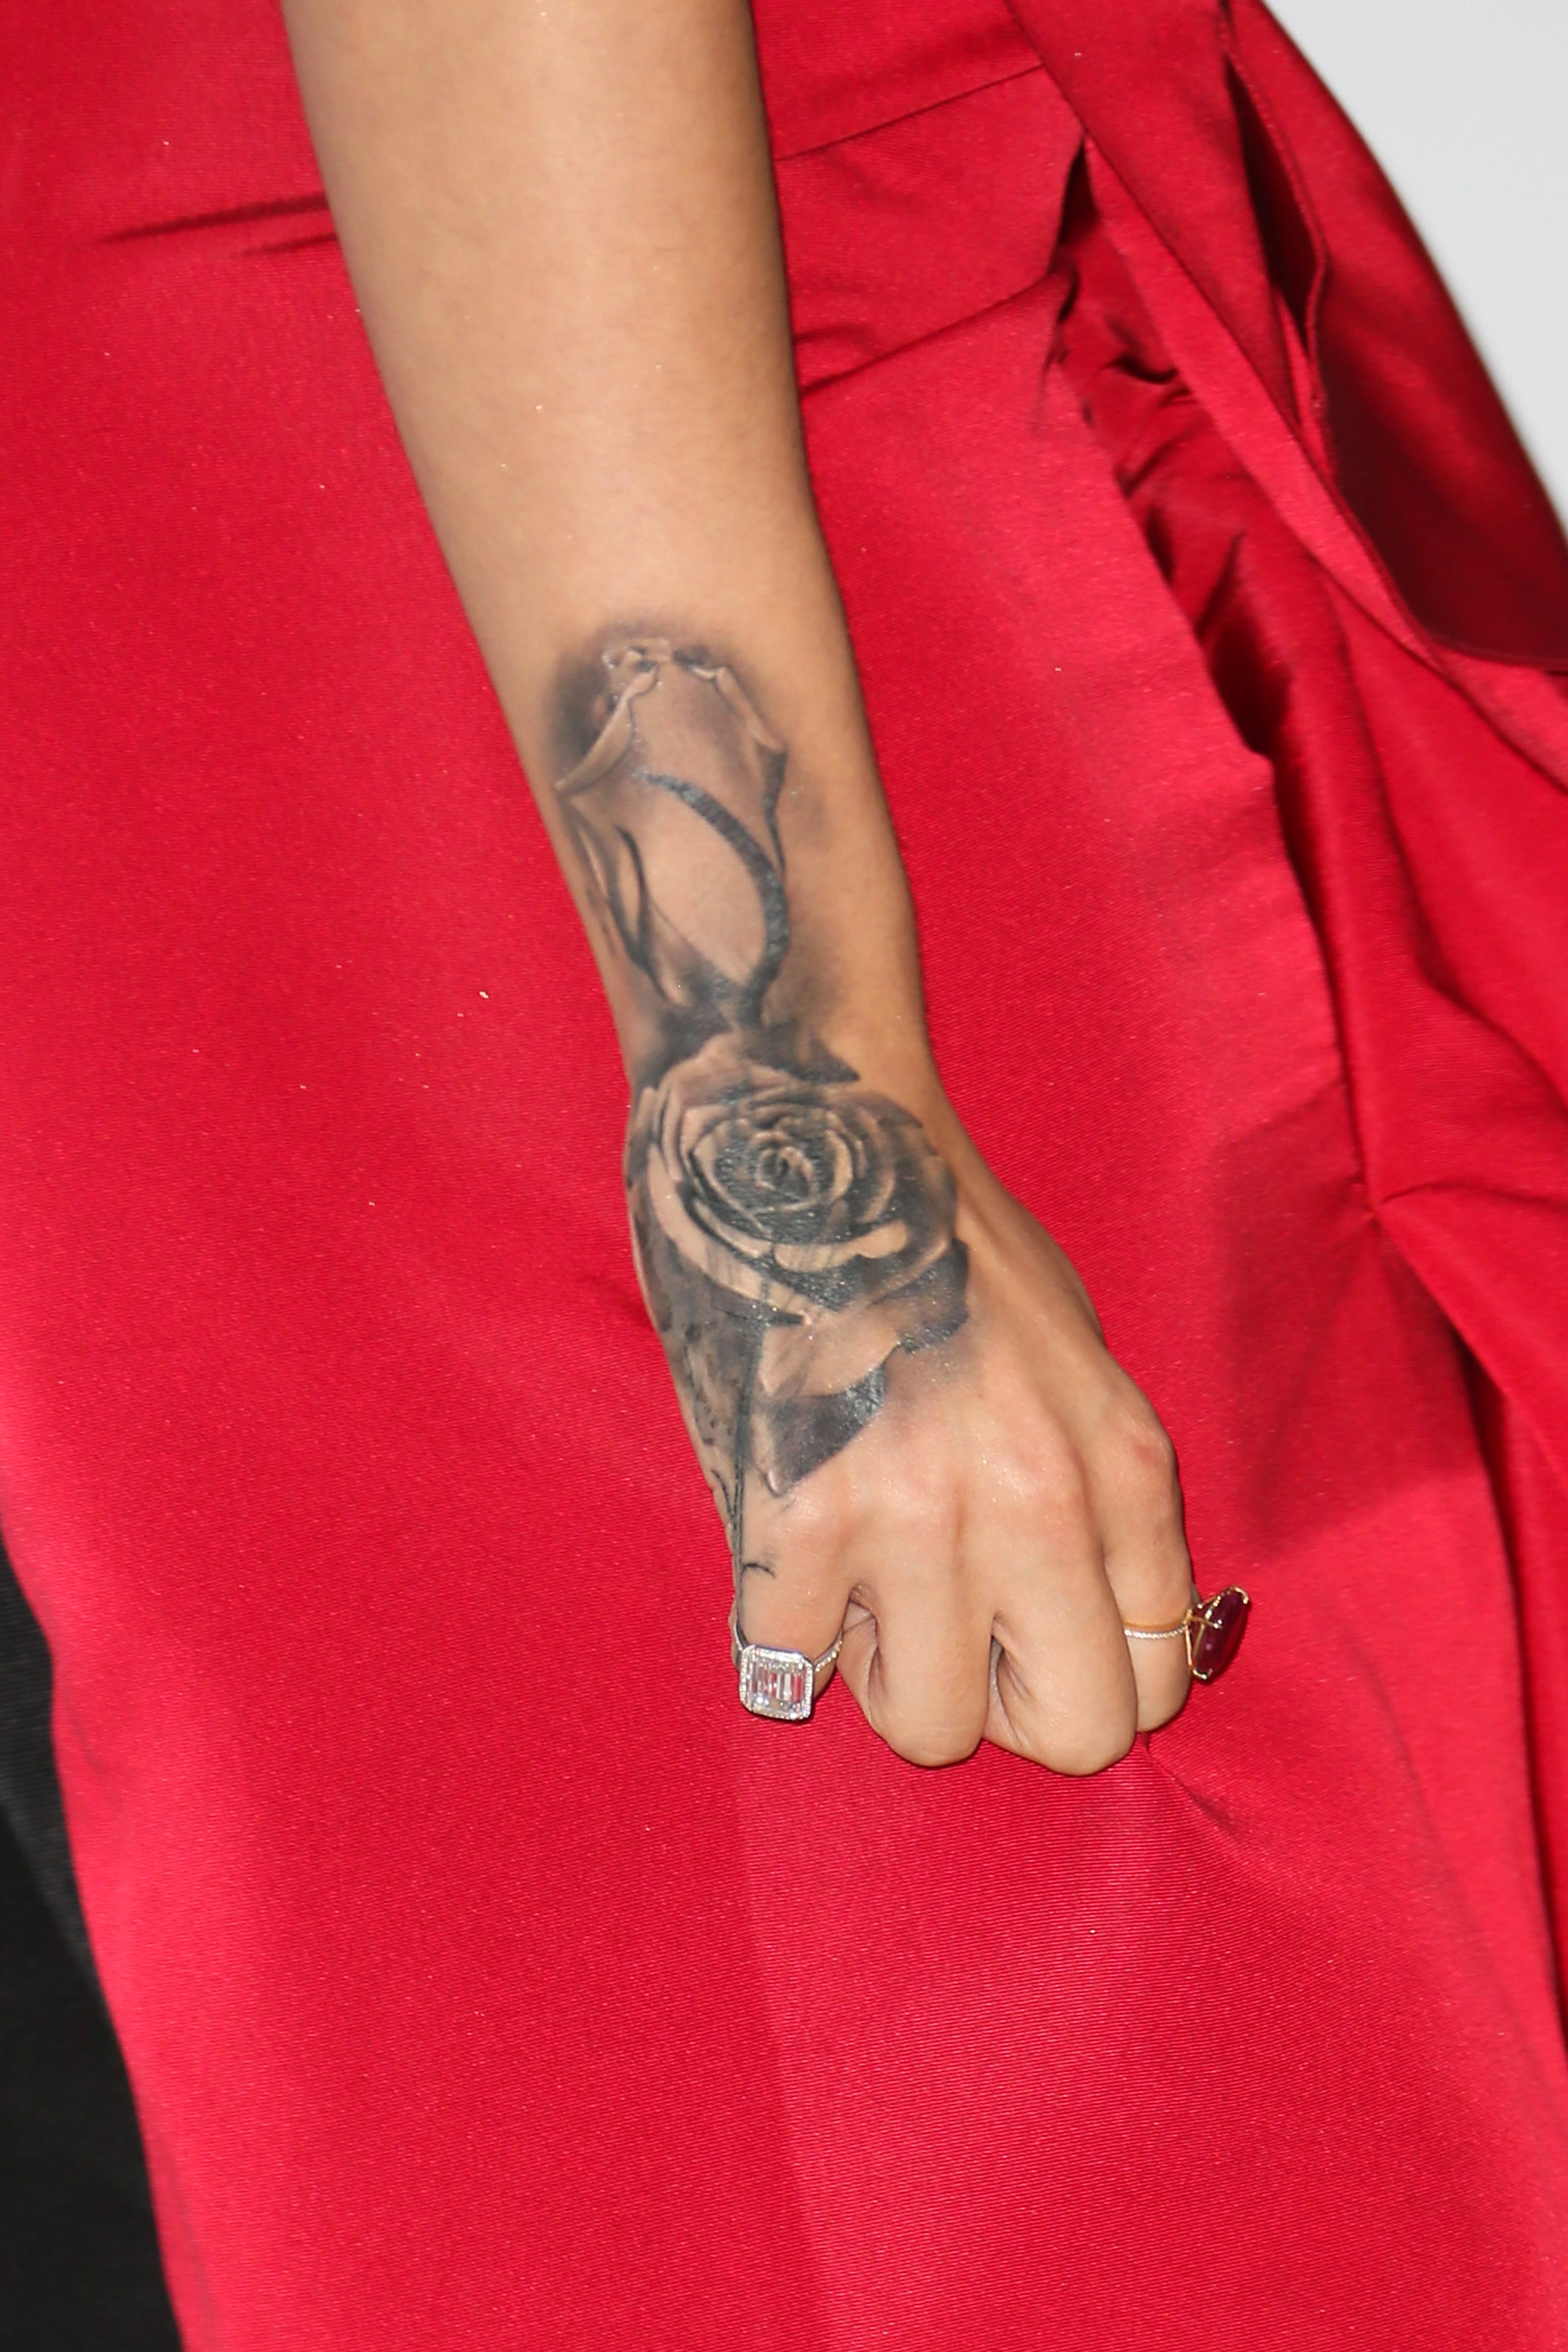 What is the metaphorical meaning behind this tattoo? I love the